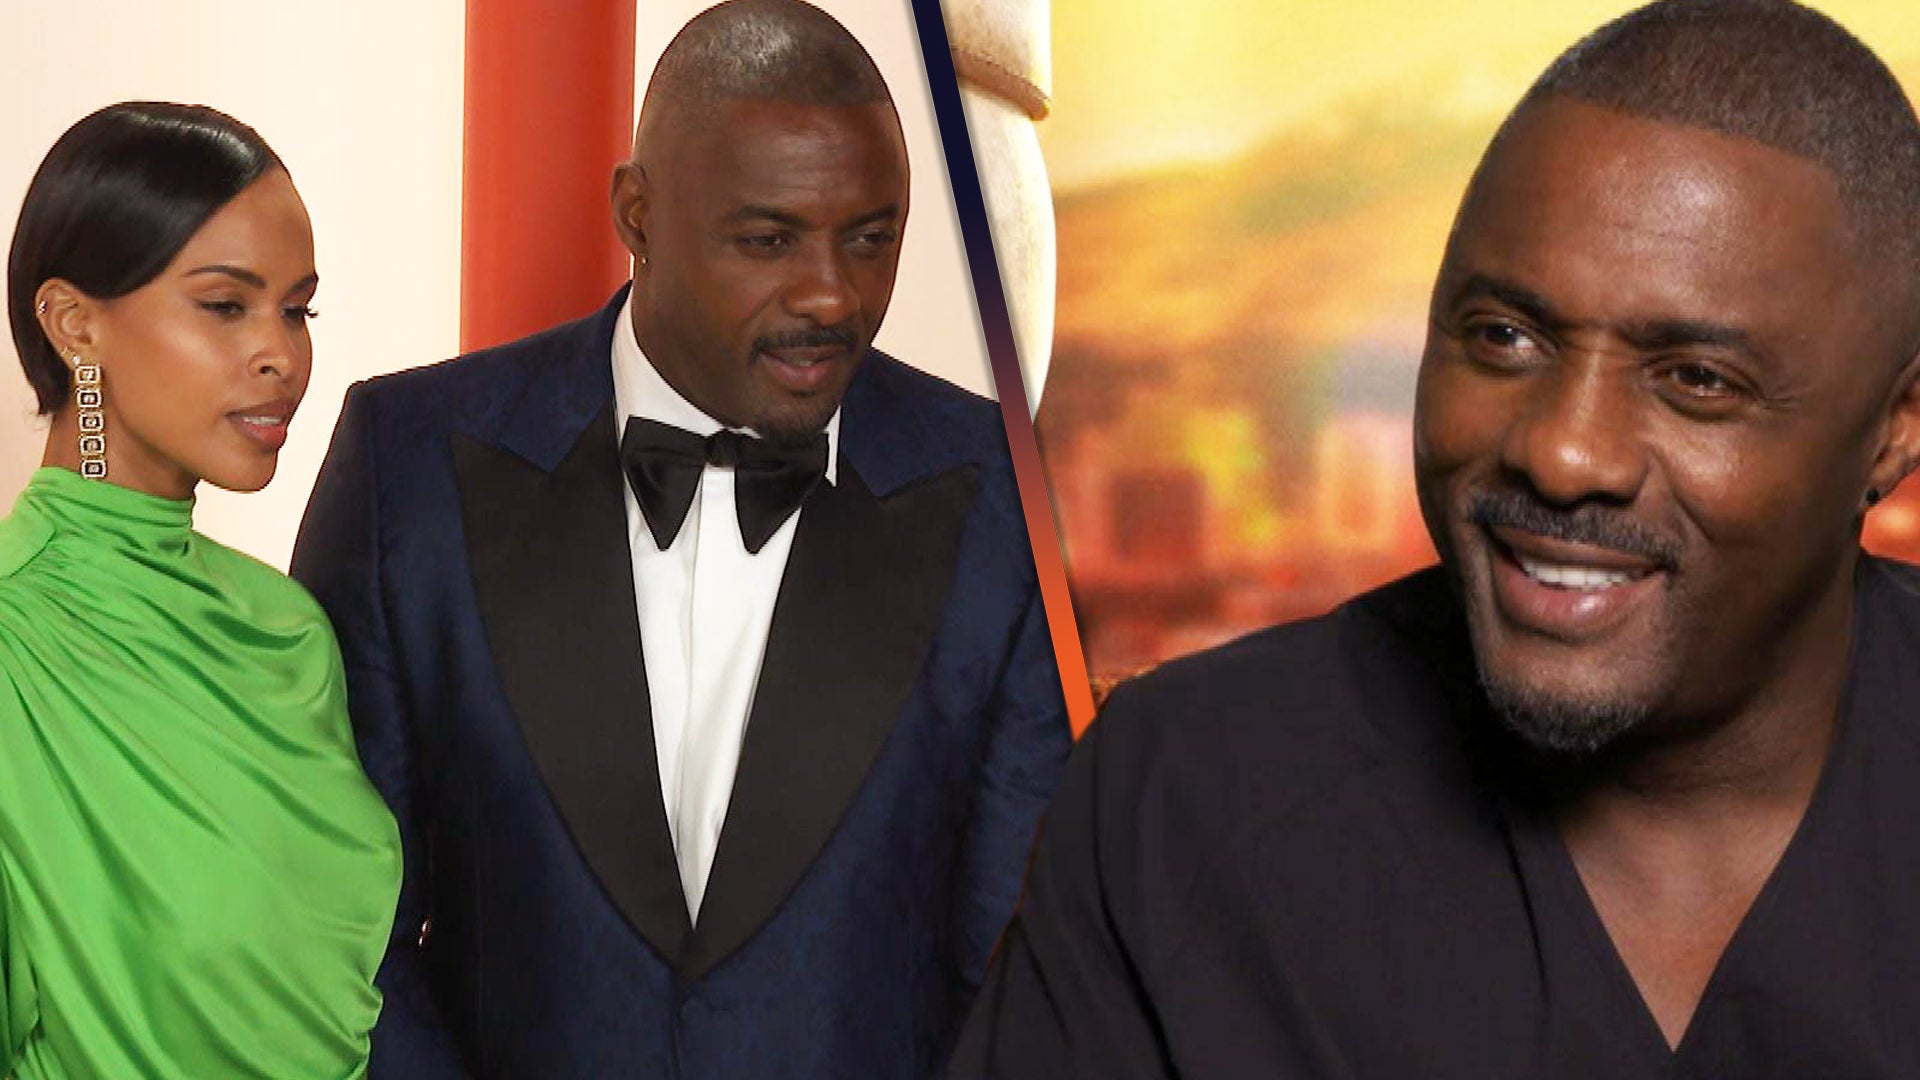 Idris Elba on His 'Really Special' 5-Year Wedding Anniversary Plans (Exclusive)